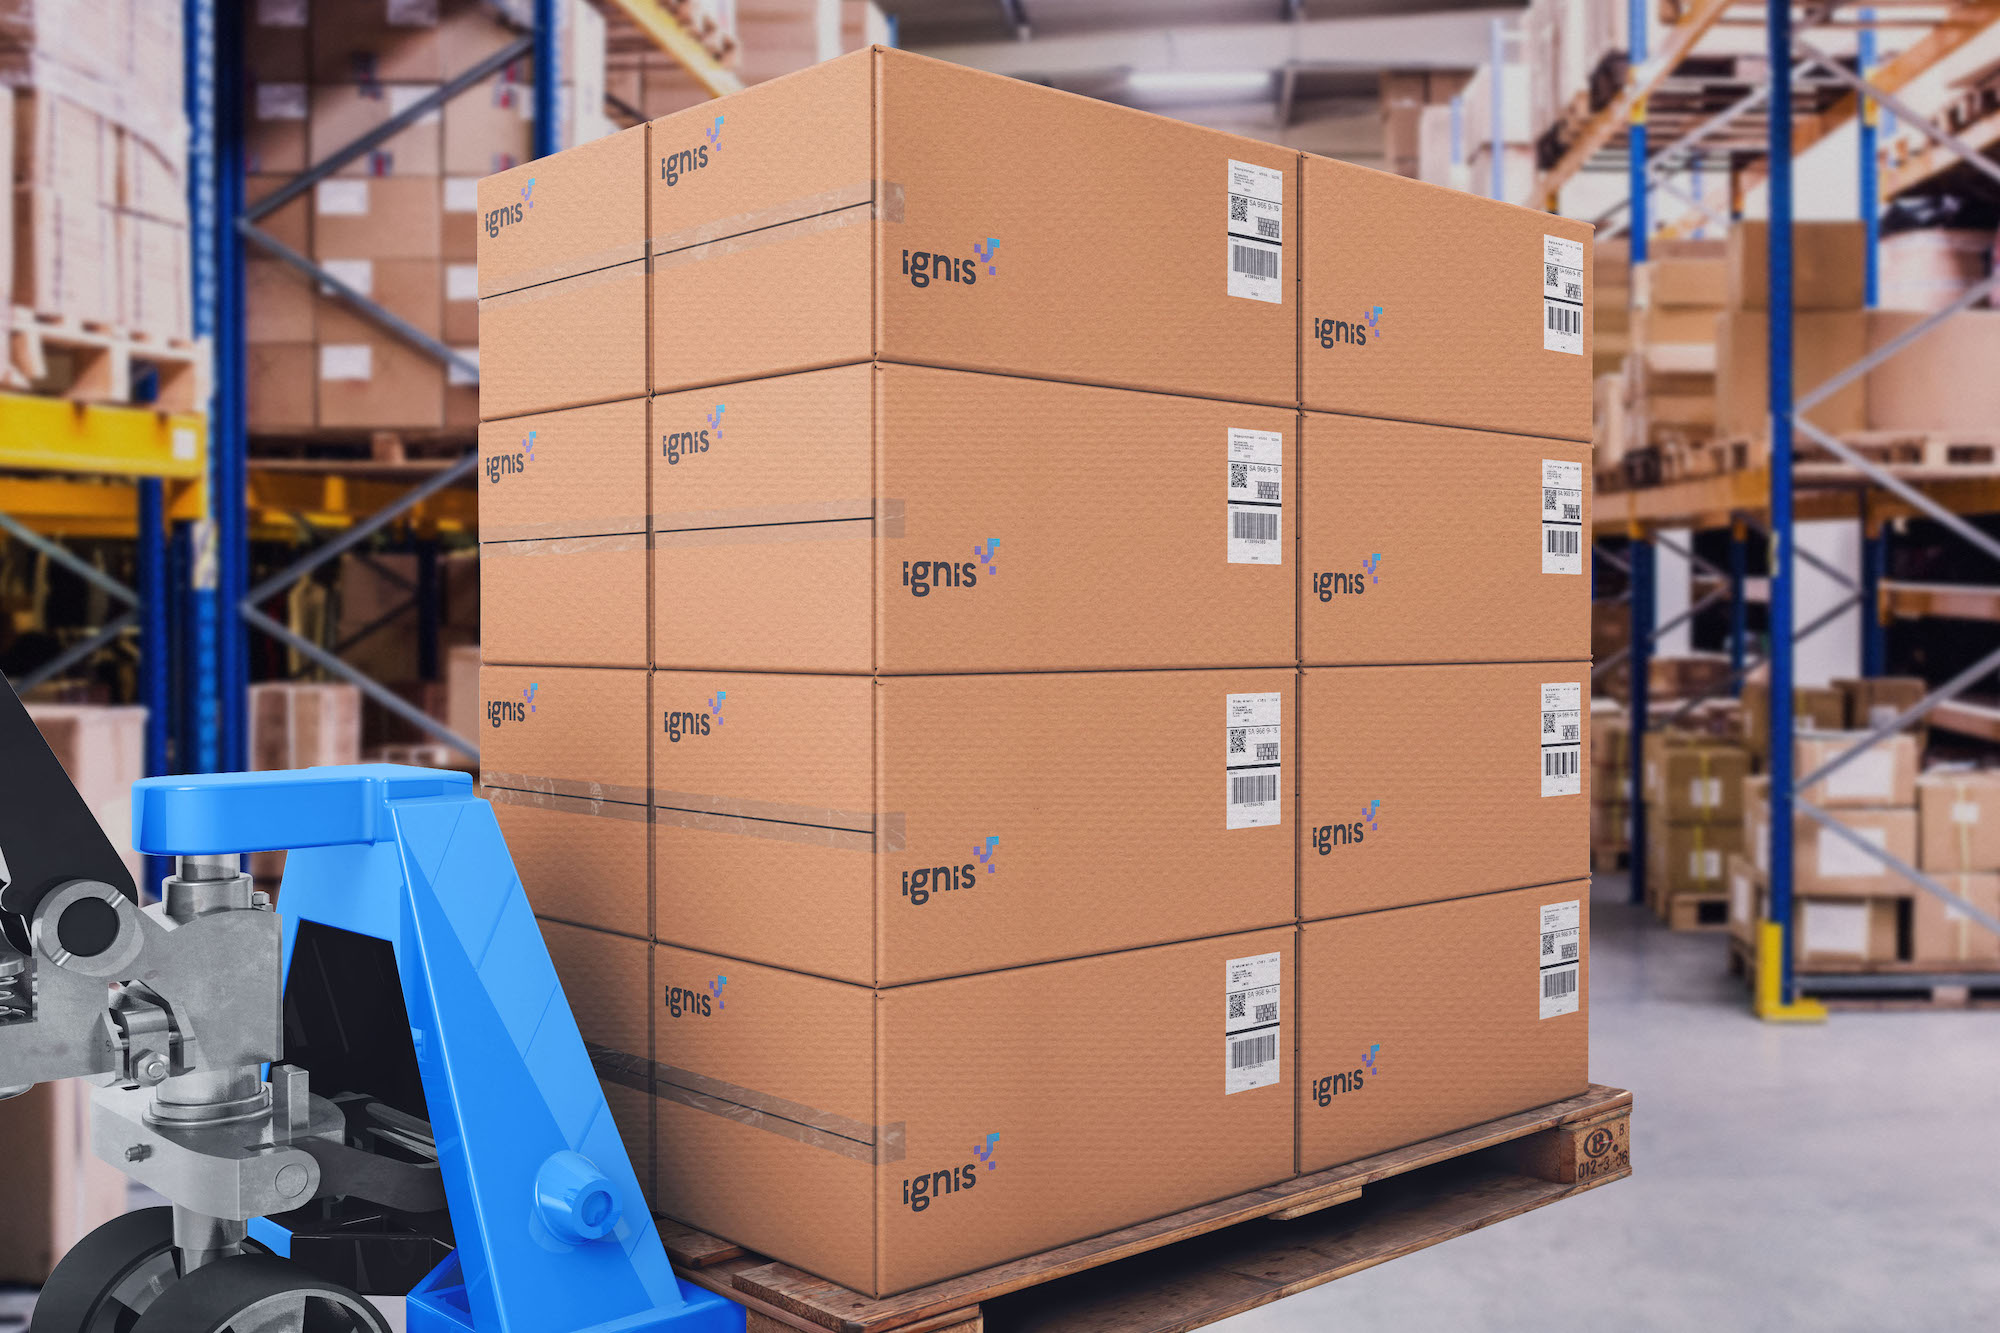 carton boxes on pallet in warehouse